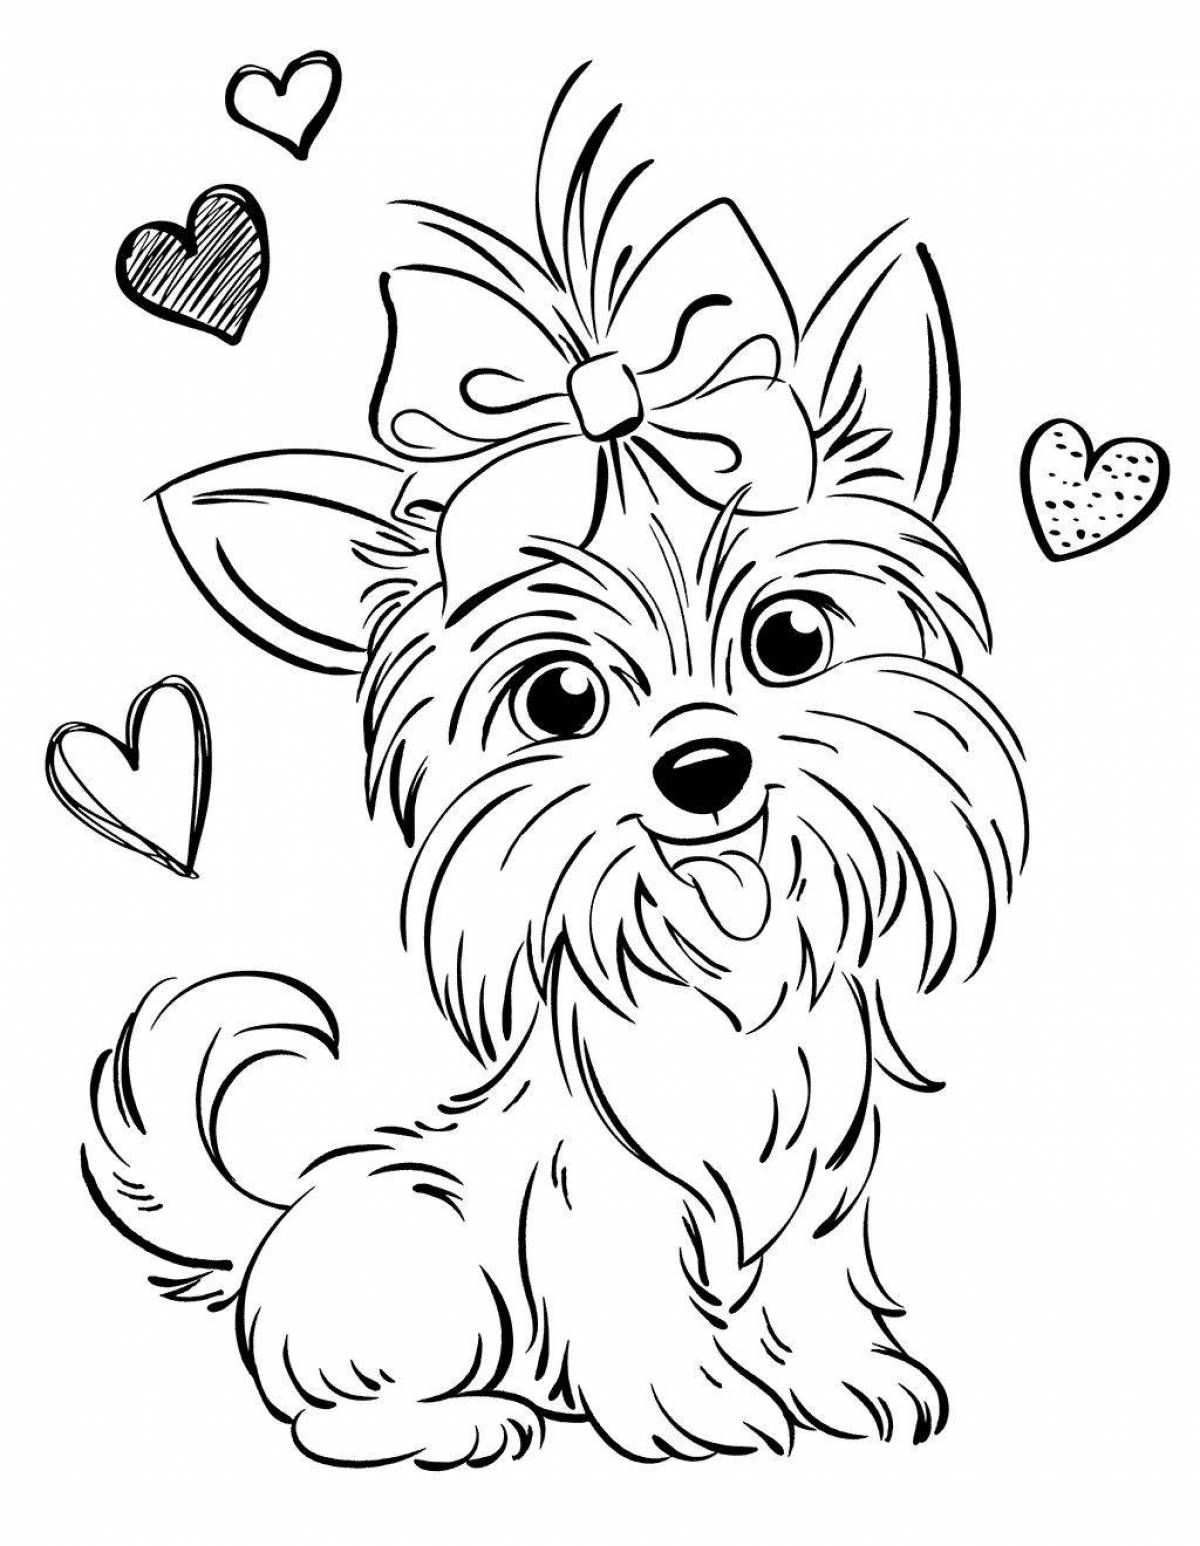 Friendly coloring dog with a heart